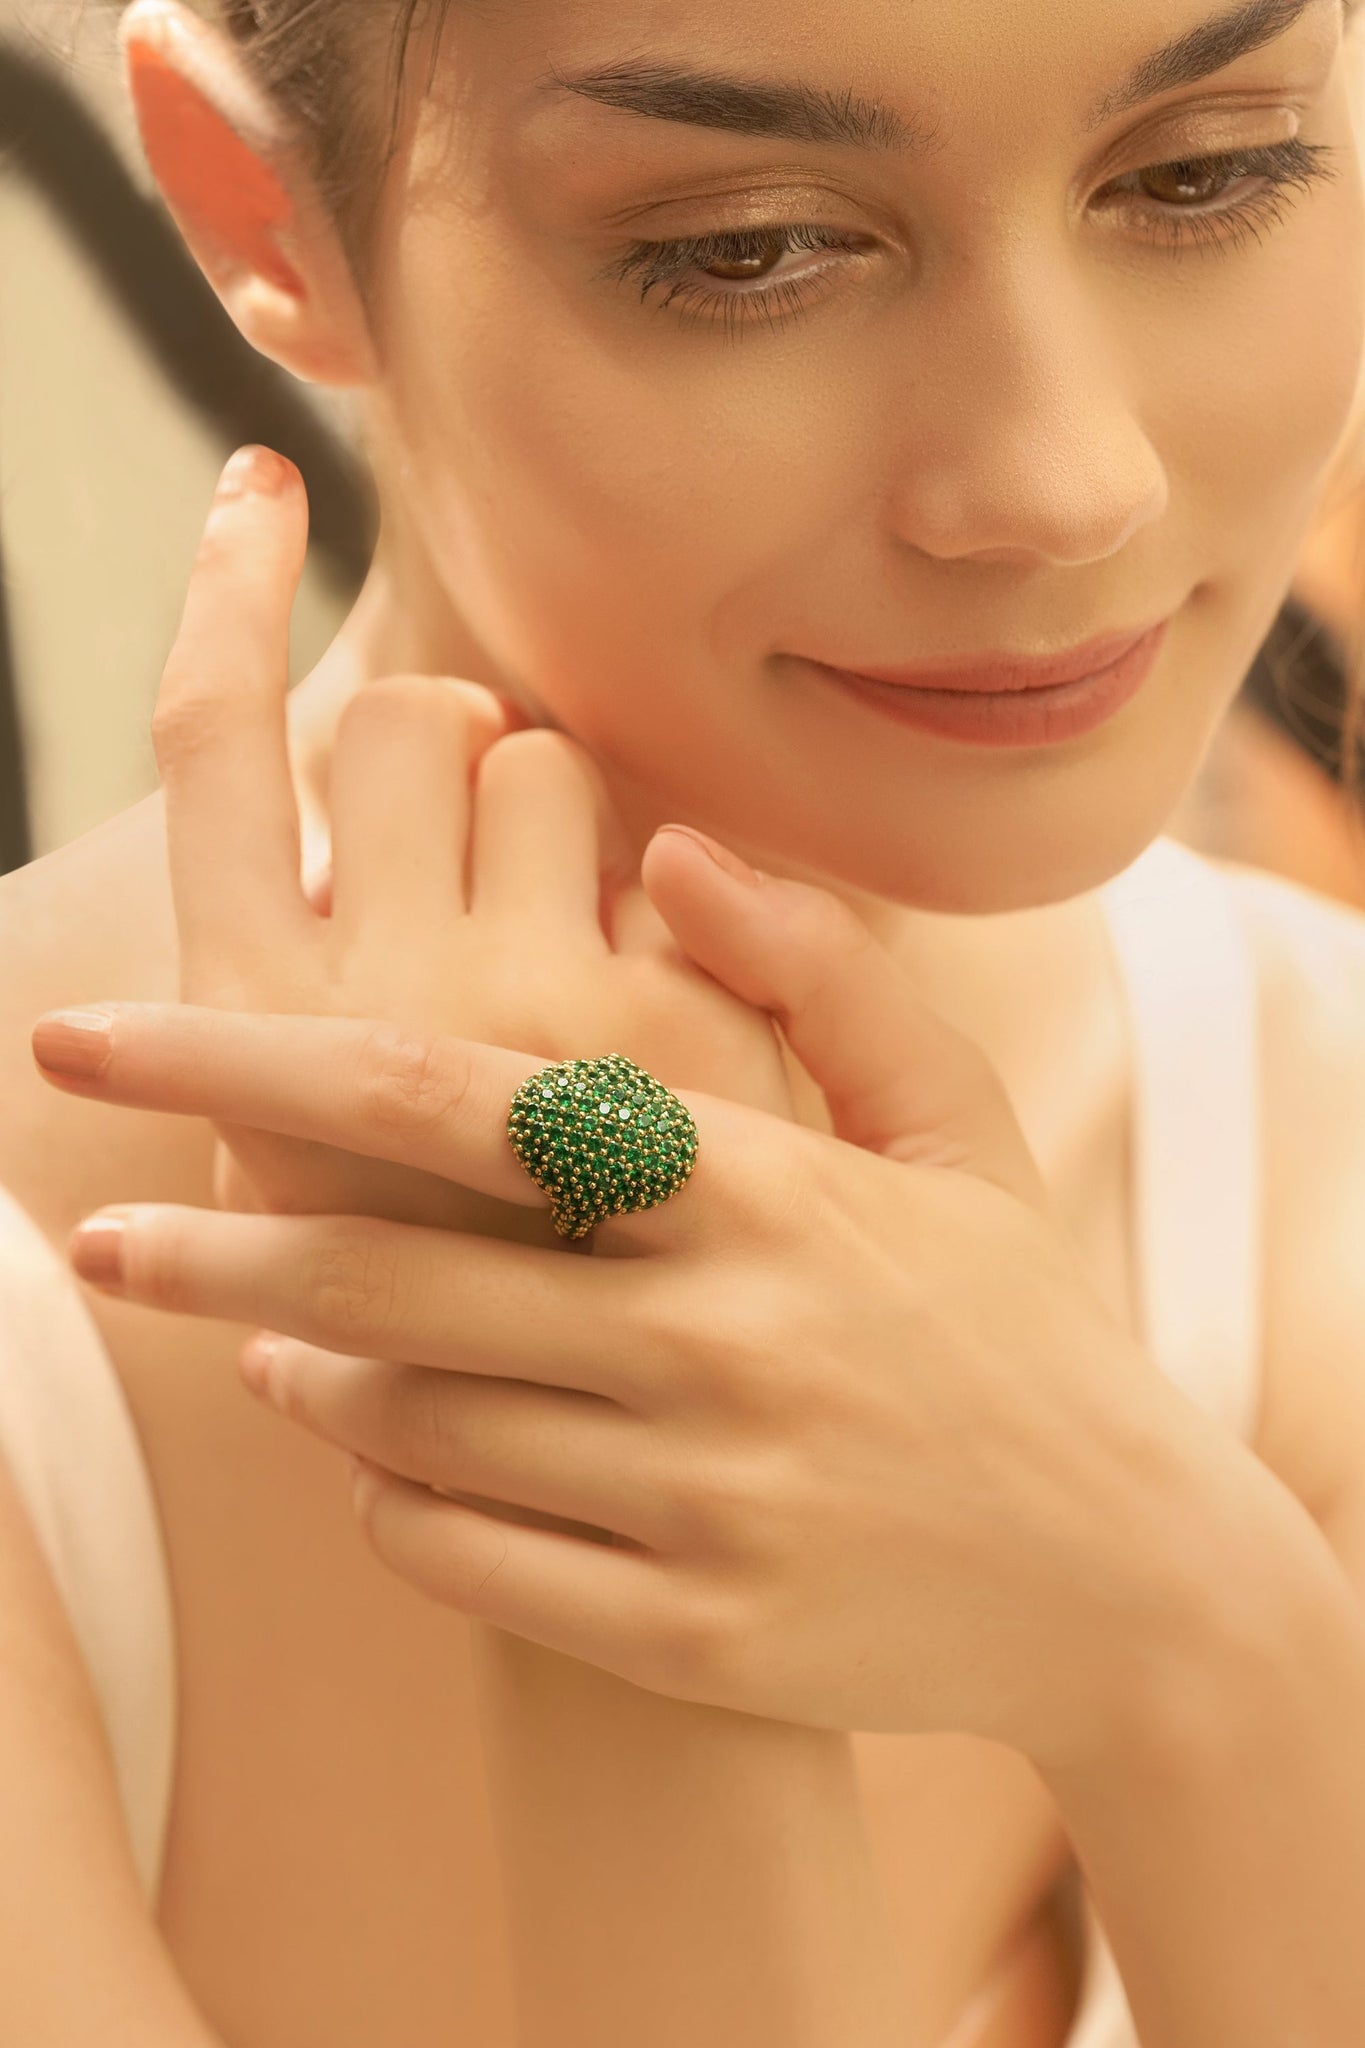 The Statement Ring - Yellow Gold Emerald